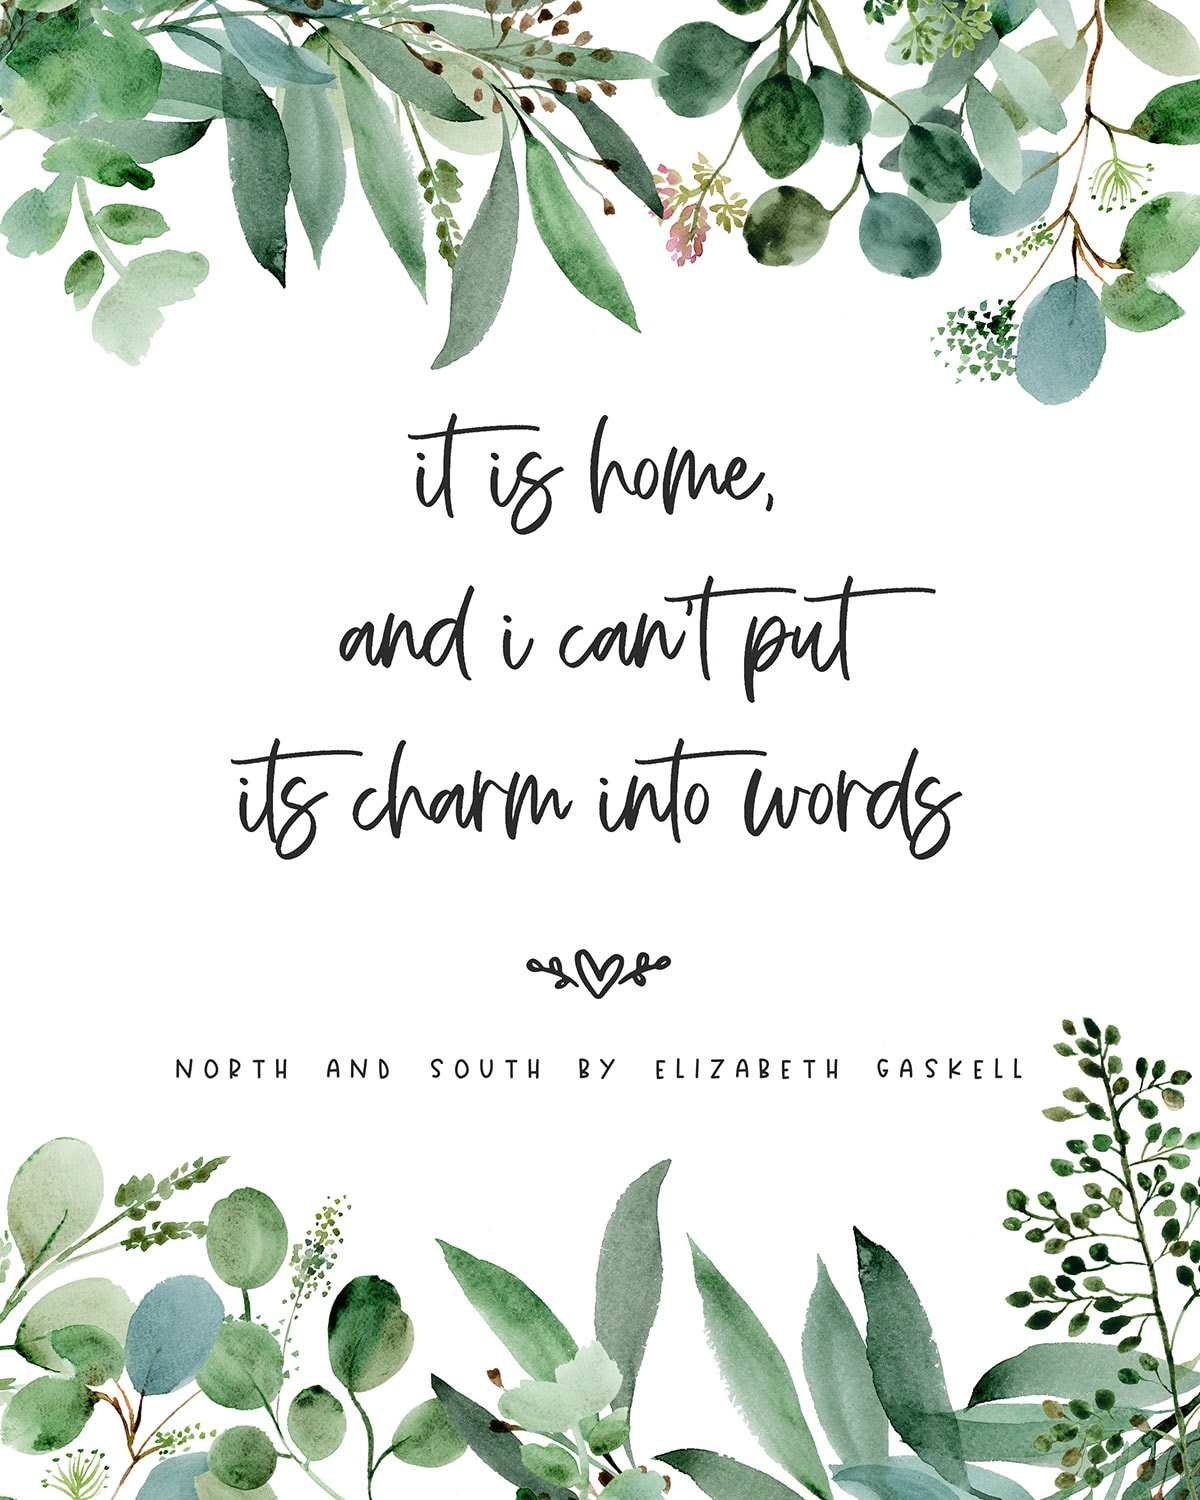 A Eucalyptus print with an Elizabeth Gaskell quote.